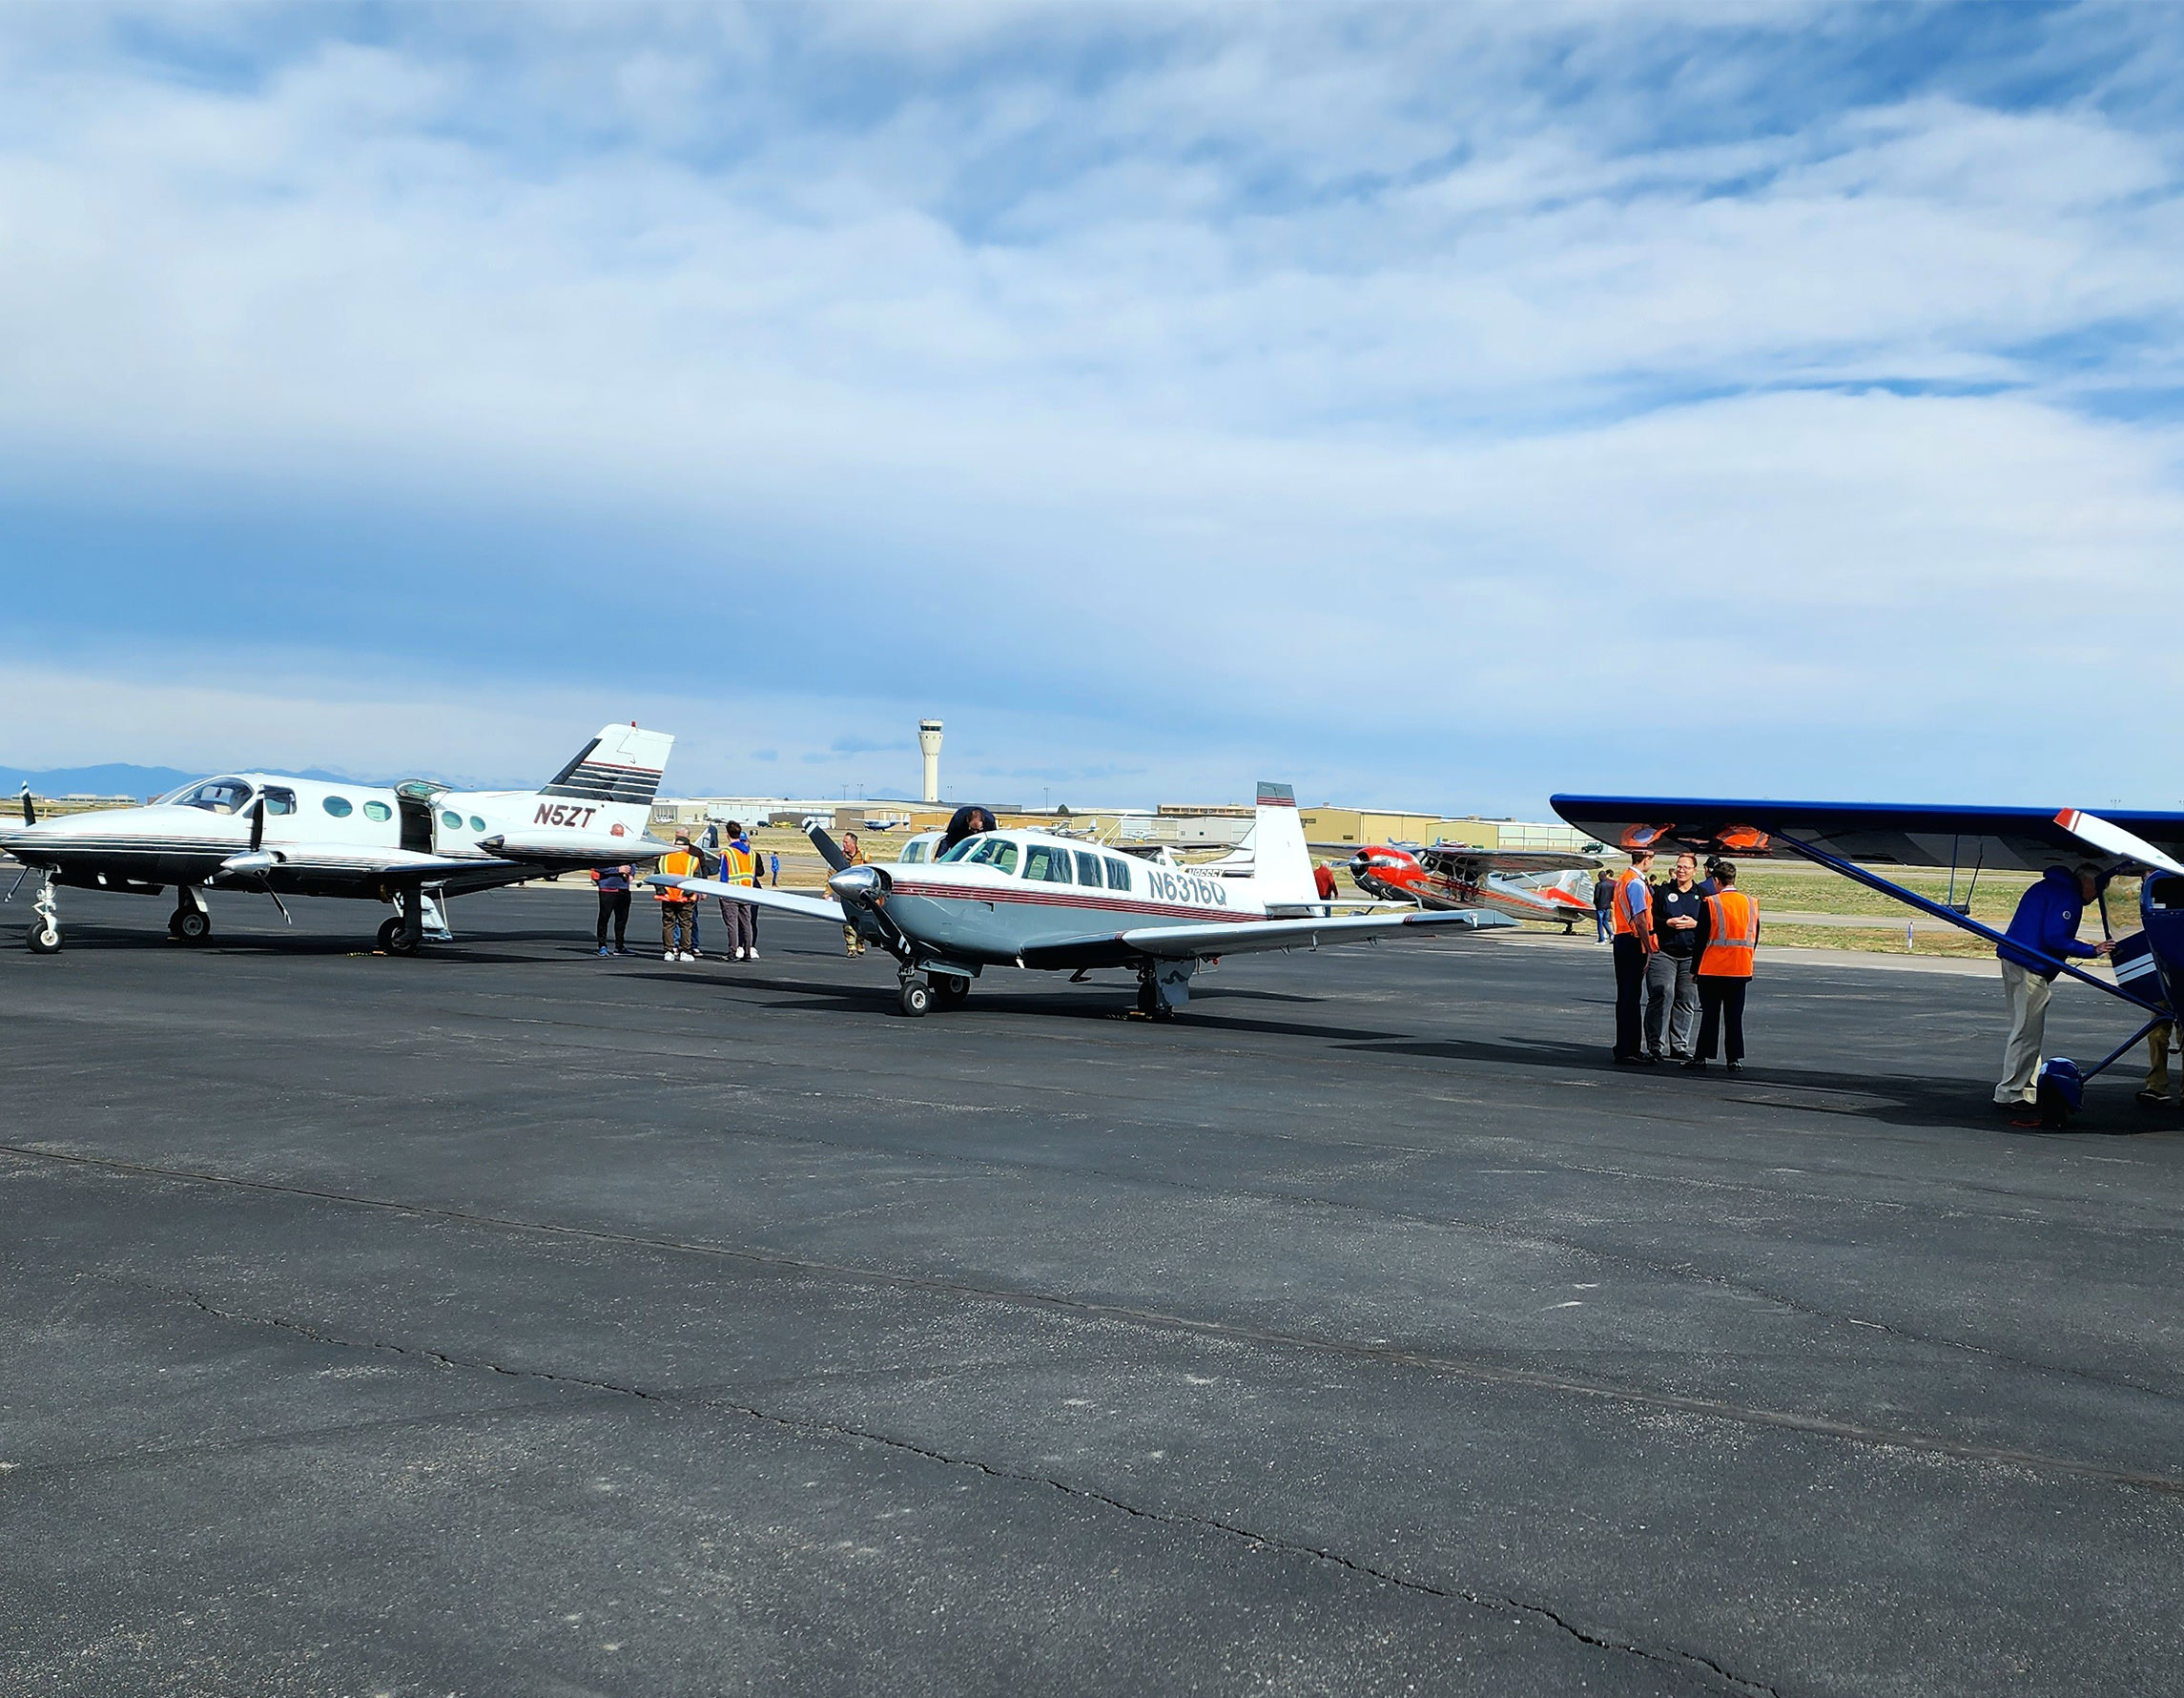 Aircraft on the ramp at Exploration of Flight